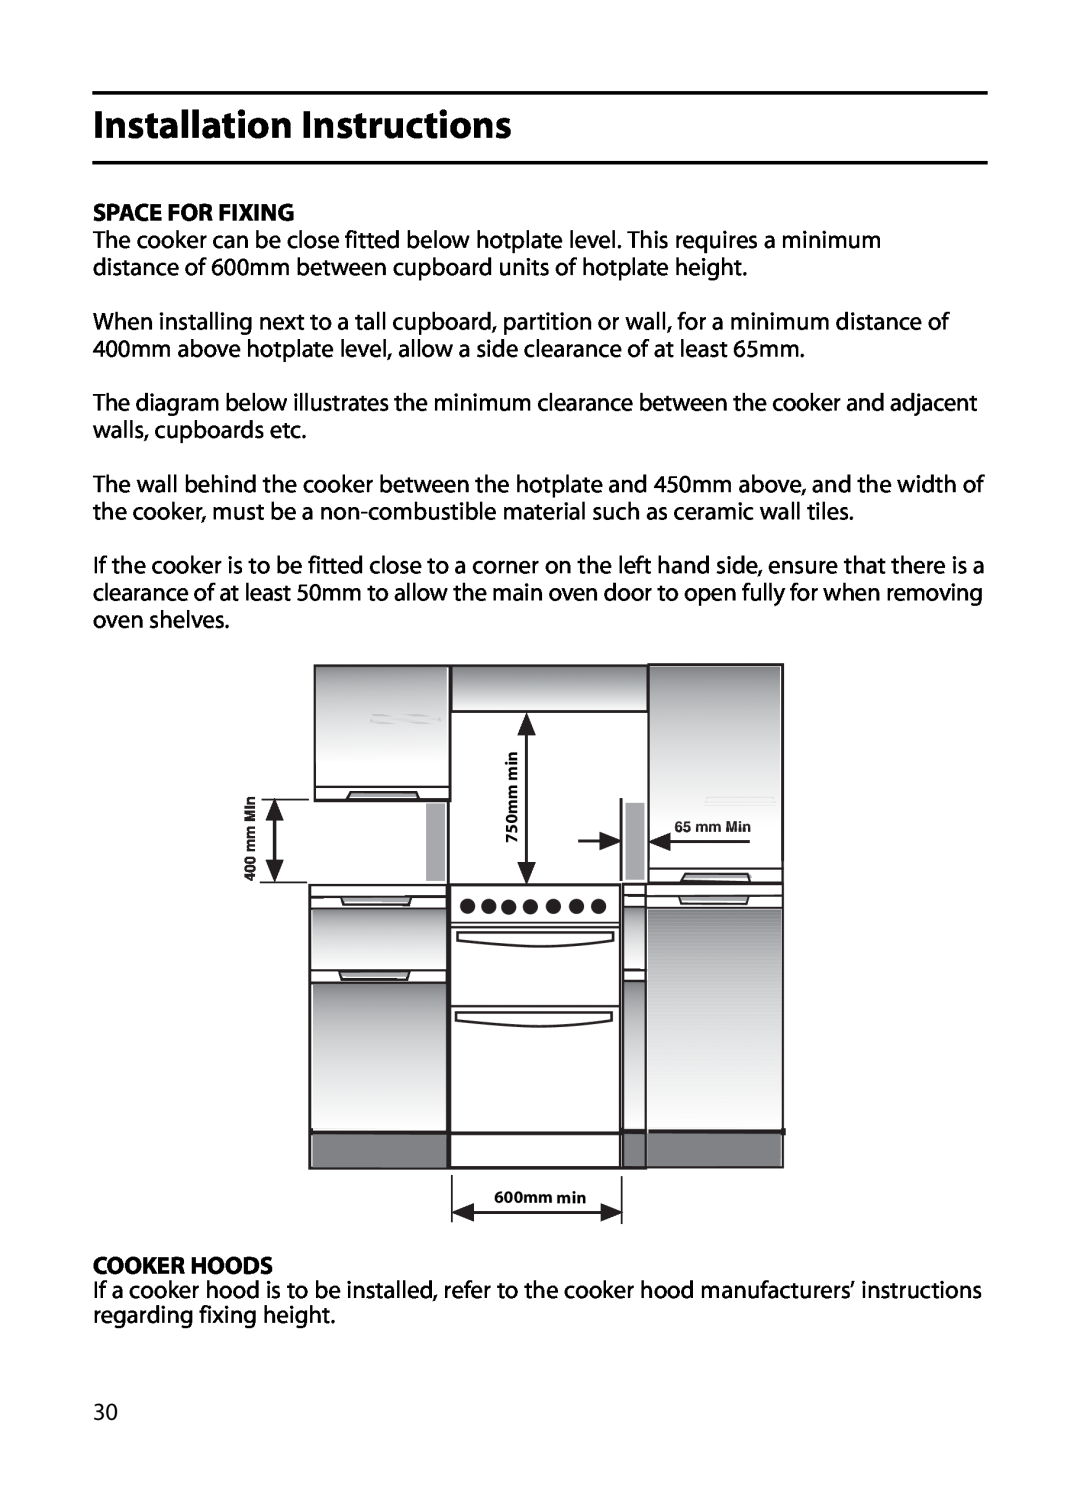 Indesit KD641G, KD643G, KD640G manual Installation Instructions, Space For Fixing, Cooker Hoods 